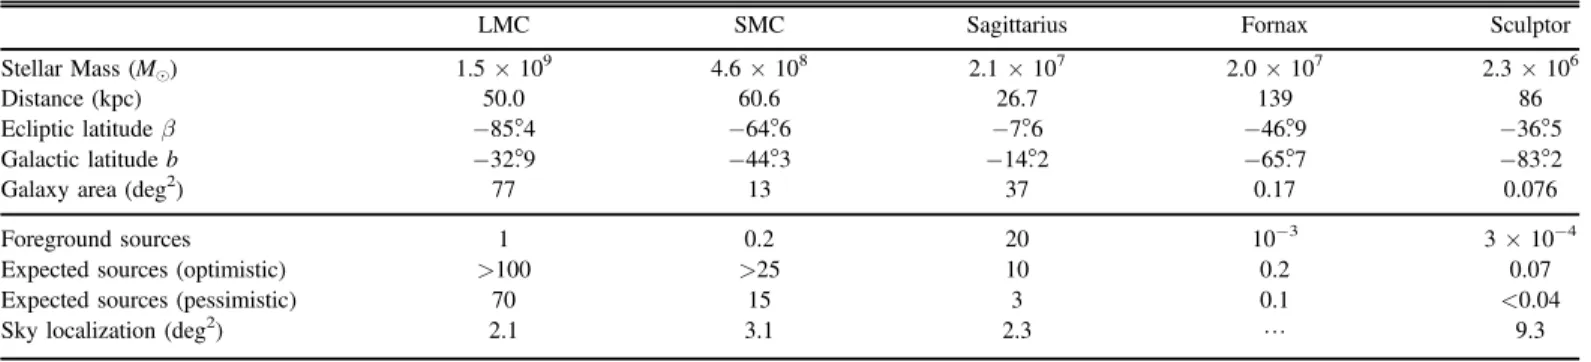 Table 1 summarizes the properties of selected known MW satellites and the expected number of DWDs that can be observed by LISA according to the population synthesis models